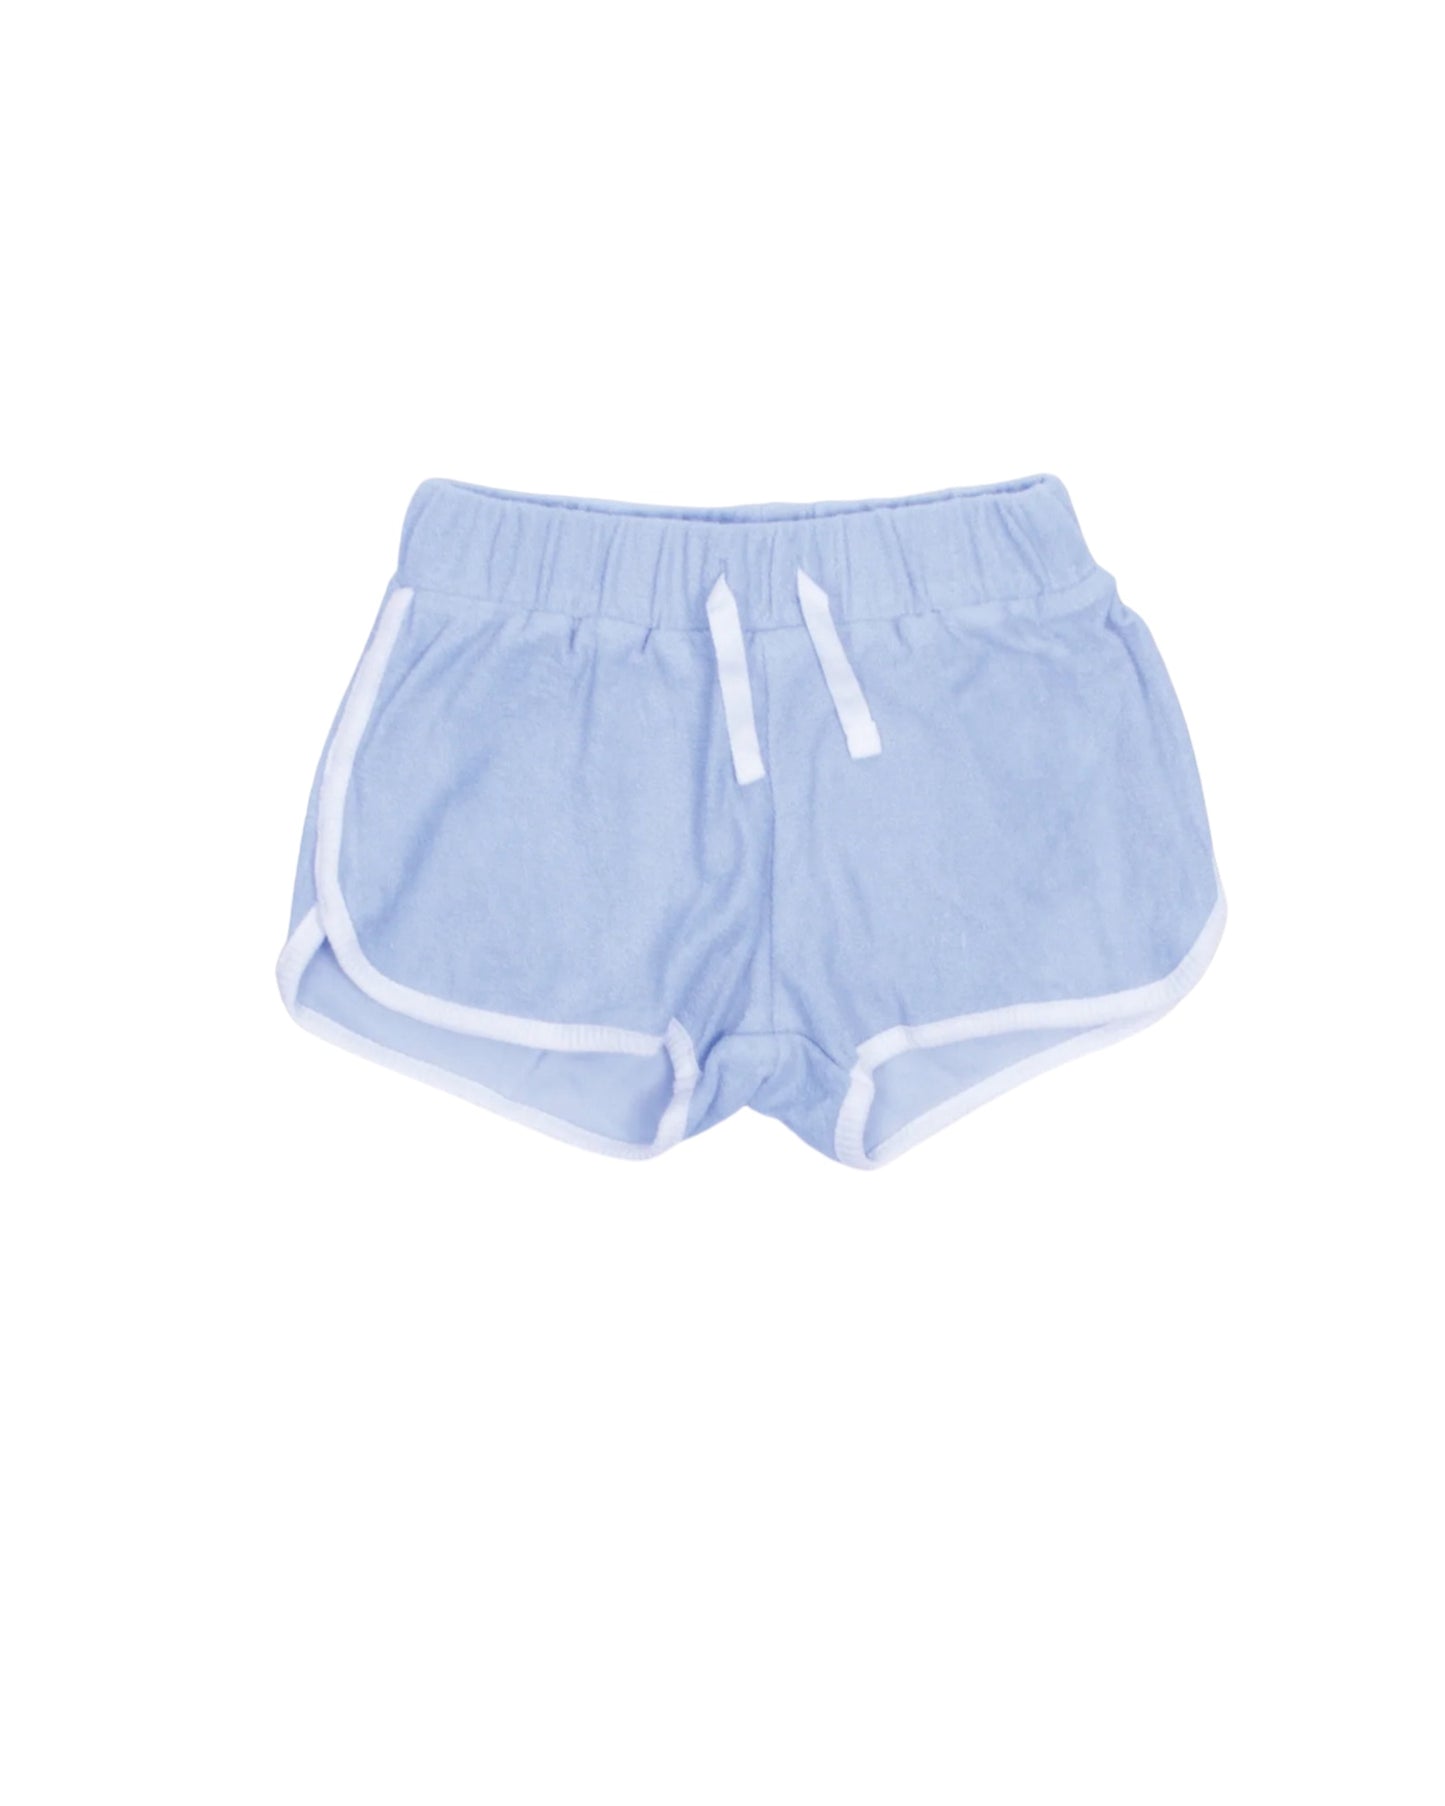 Shade Critters Terry Shorts Blue